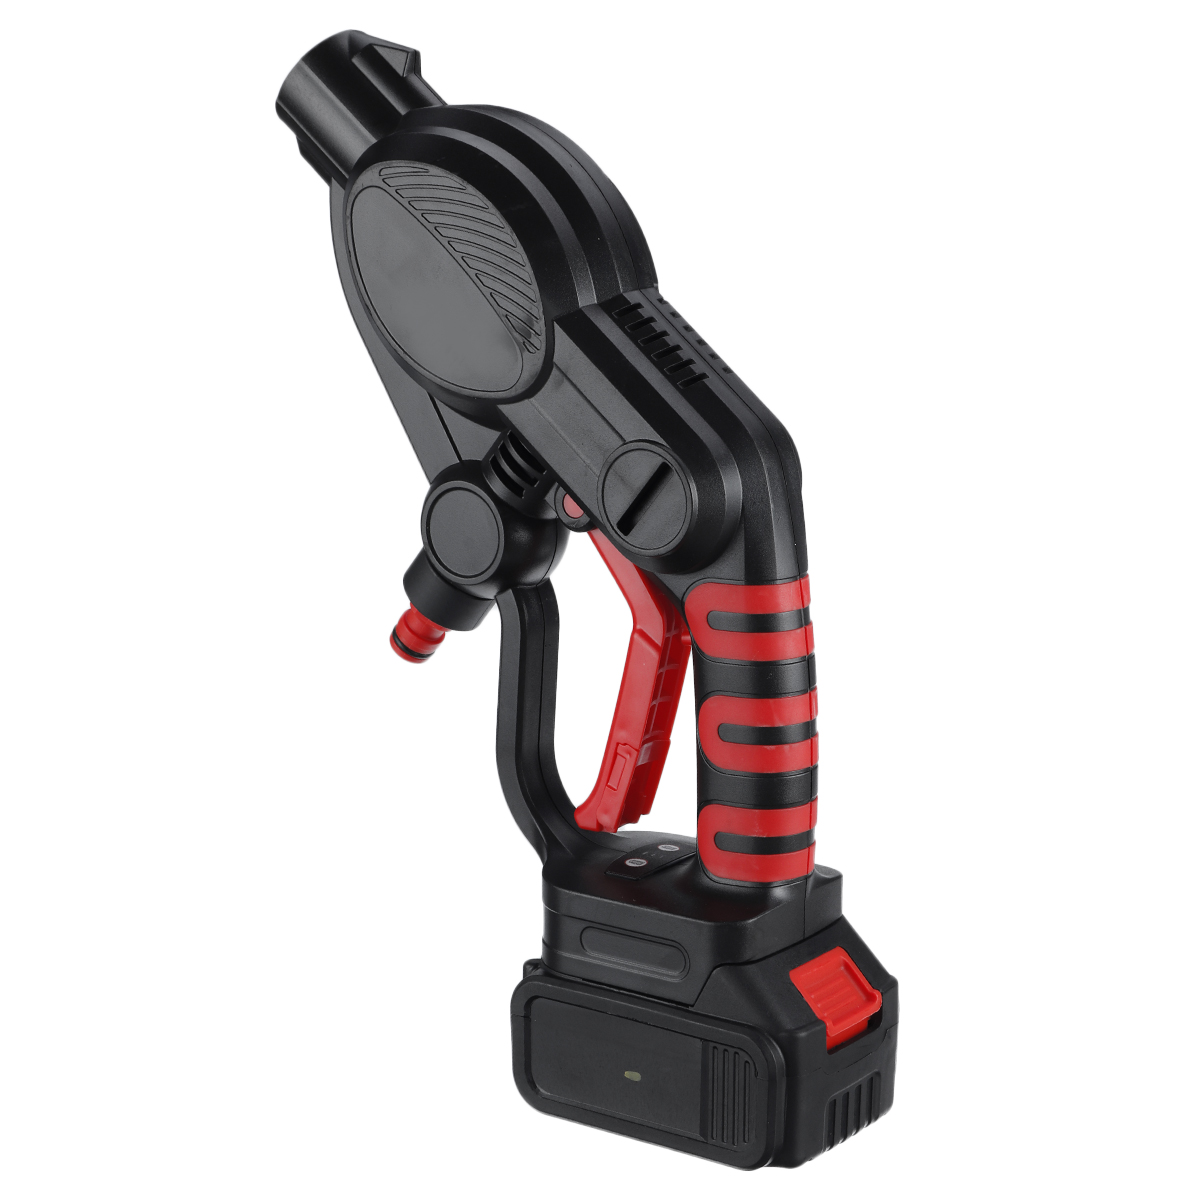 21V-20Ah-Multifunctional-Cordless-Pressure-Cleaner-Washer-Sprayer-Water-Hose-Nozzle-Pump-with-Batter-1292573-11